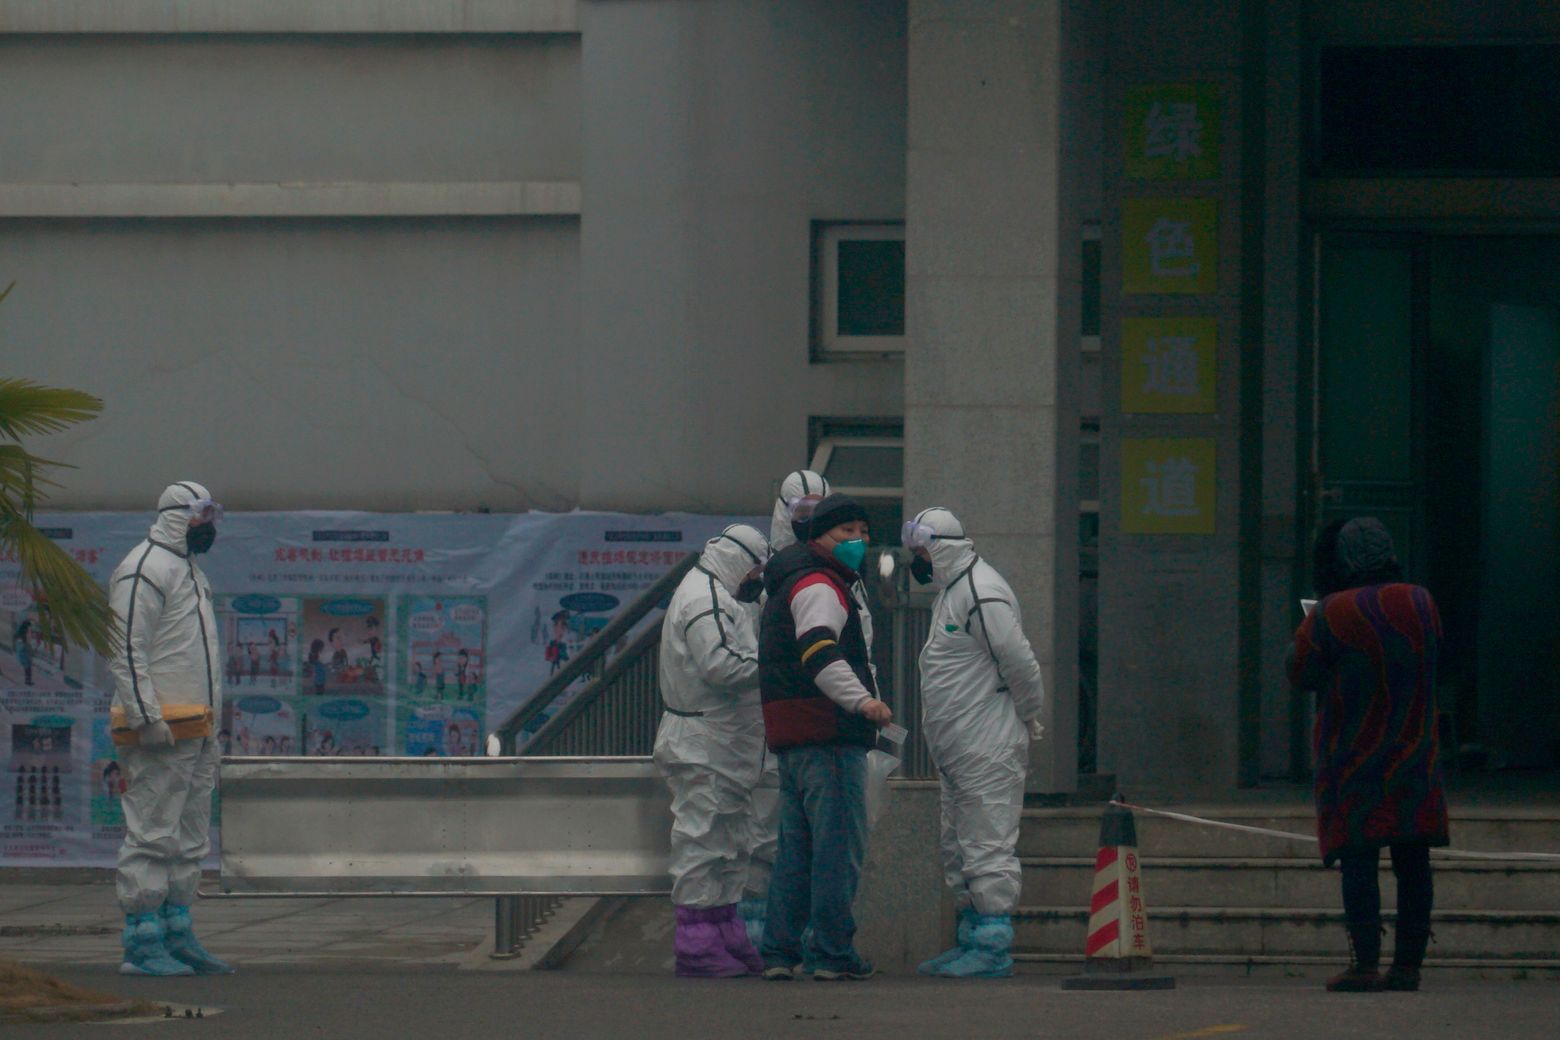 Staff in biohazard suits hold a metal stretcher by the in-patient department of Wuhan Medical Treatment Center, where some infected with a novel coronavirus are being treated, in Wuhan, China, Tuesday, Jan. 21, 2020. Heightened precautions were being taken in China and elsewhere Tuesday as governments strove to control the outbreak of the coronavirus, which threatens to grow during the Lunar New Year travel rush. (AP Photo/Dake Kang)